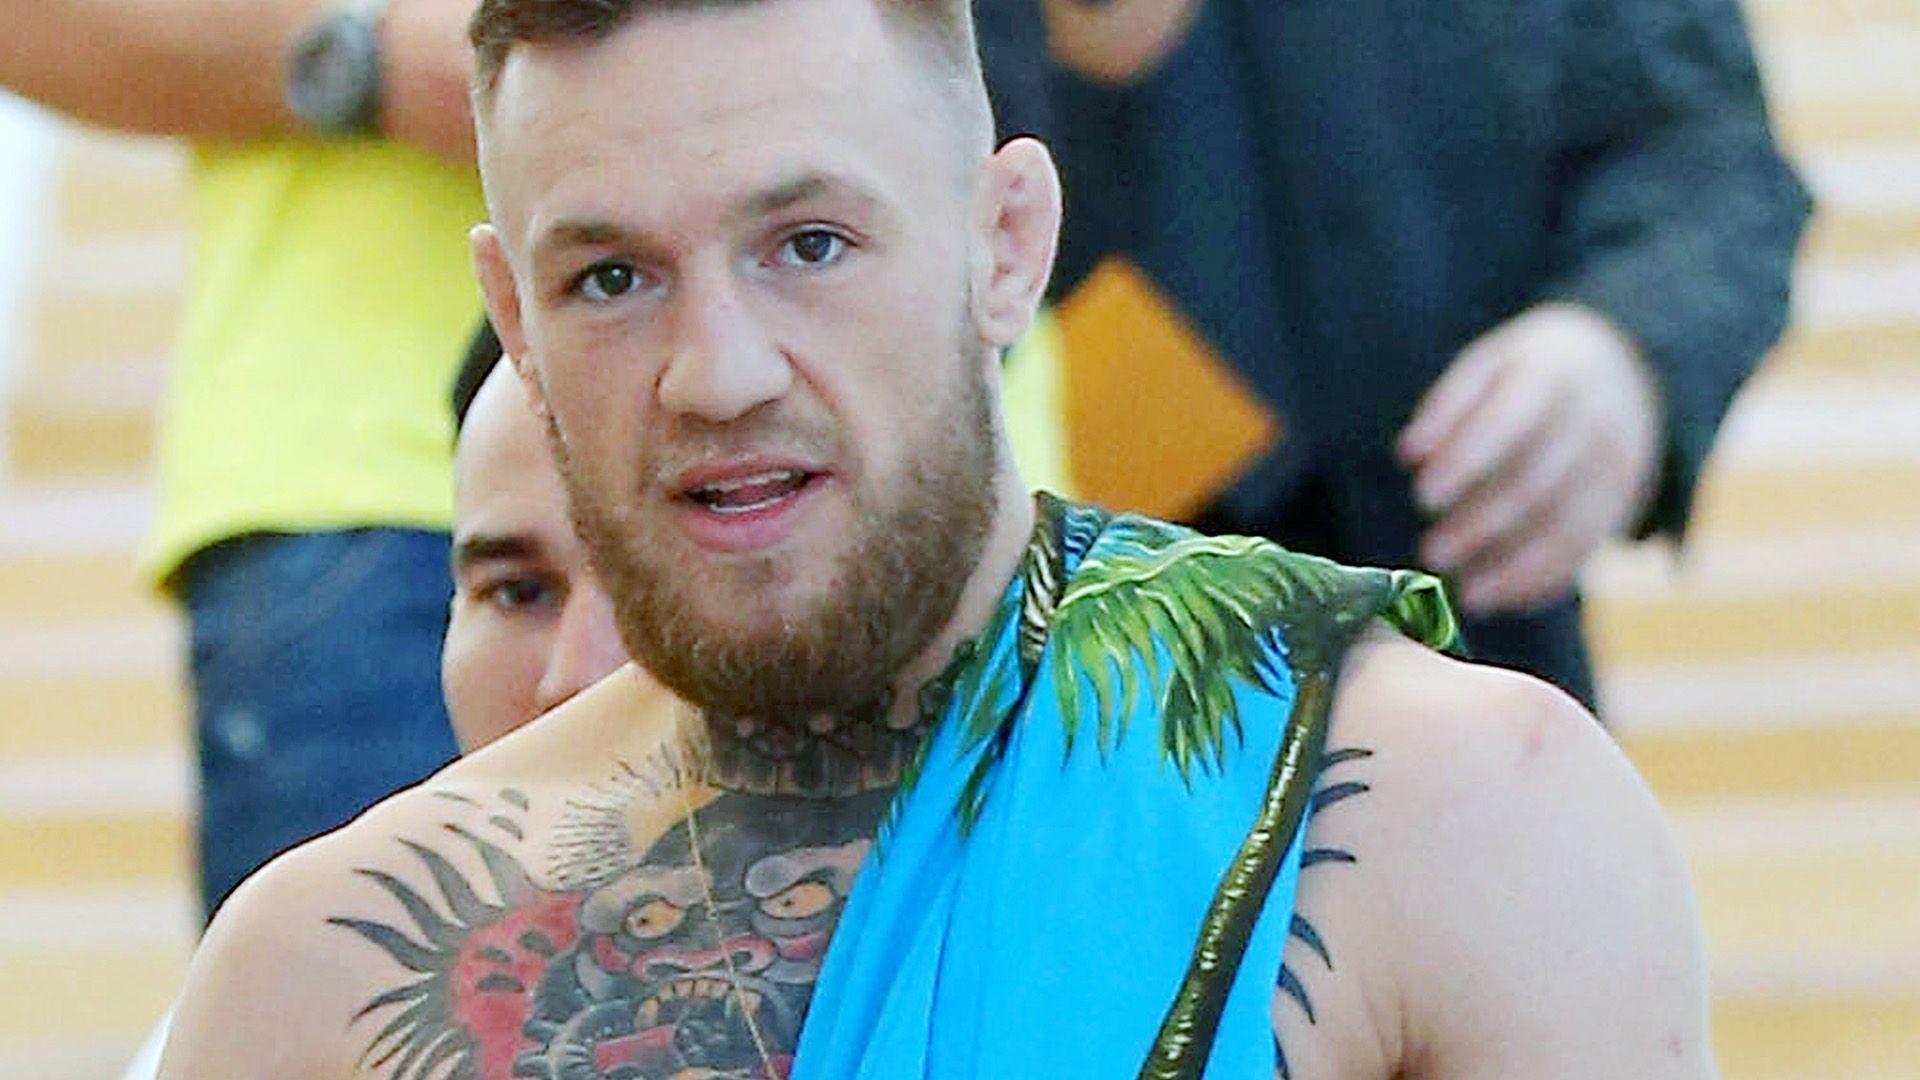 Conor McGregor Best Wallpapers And Photos In Full HD.